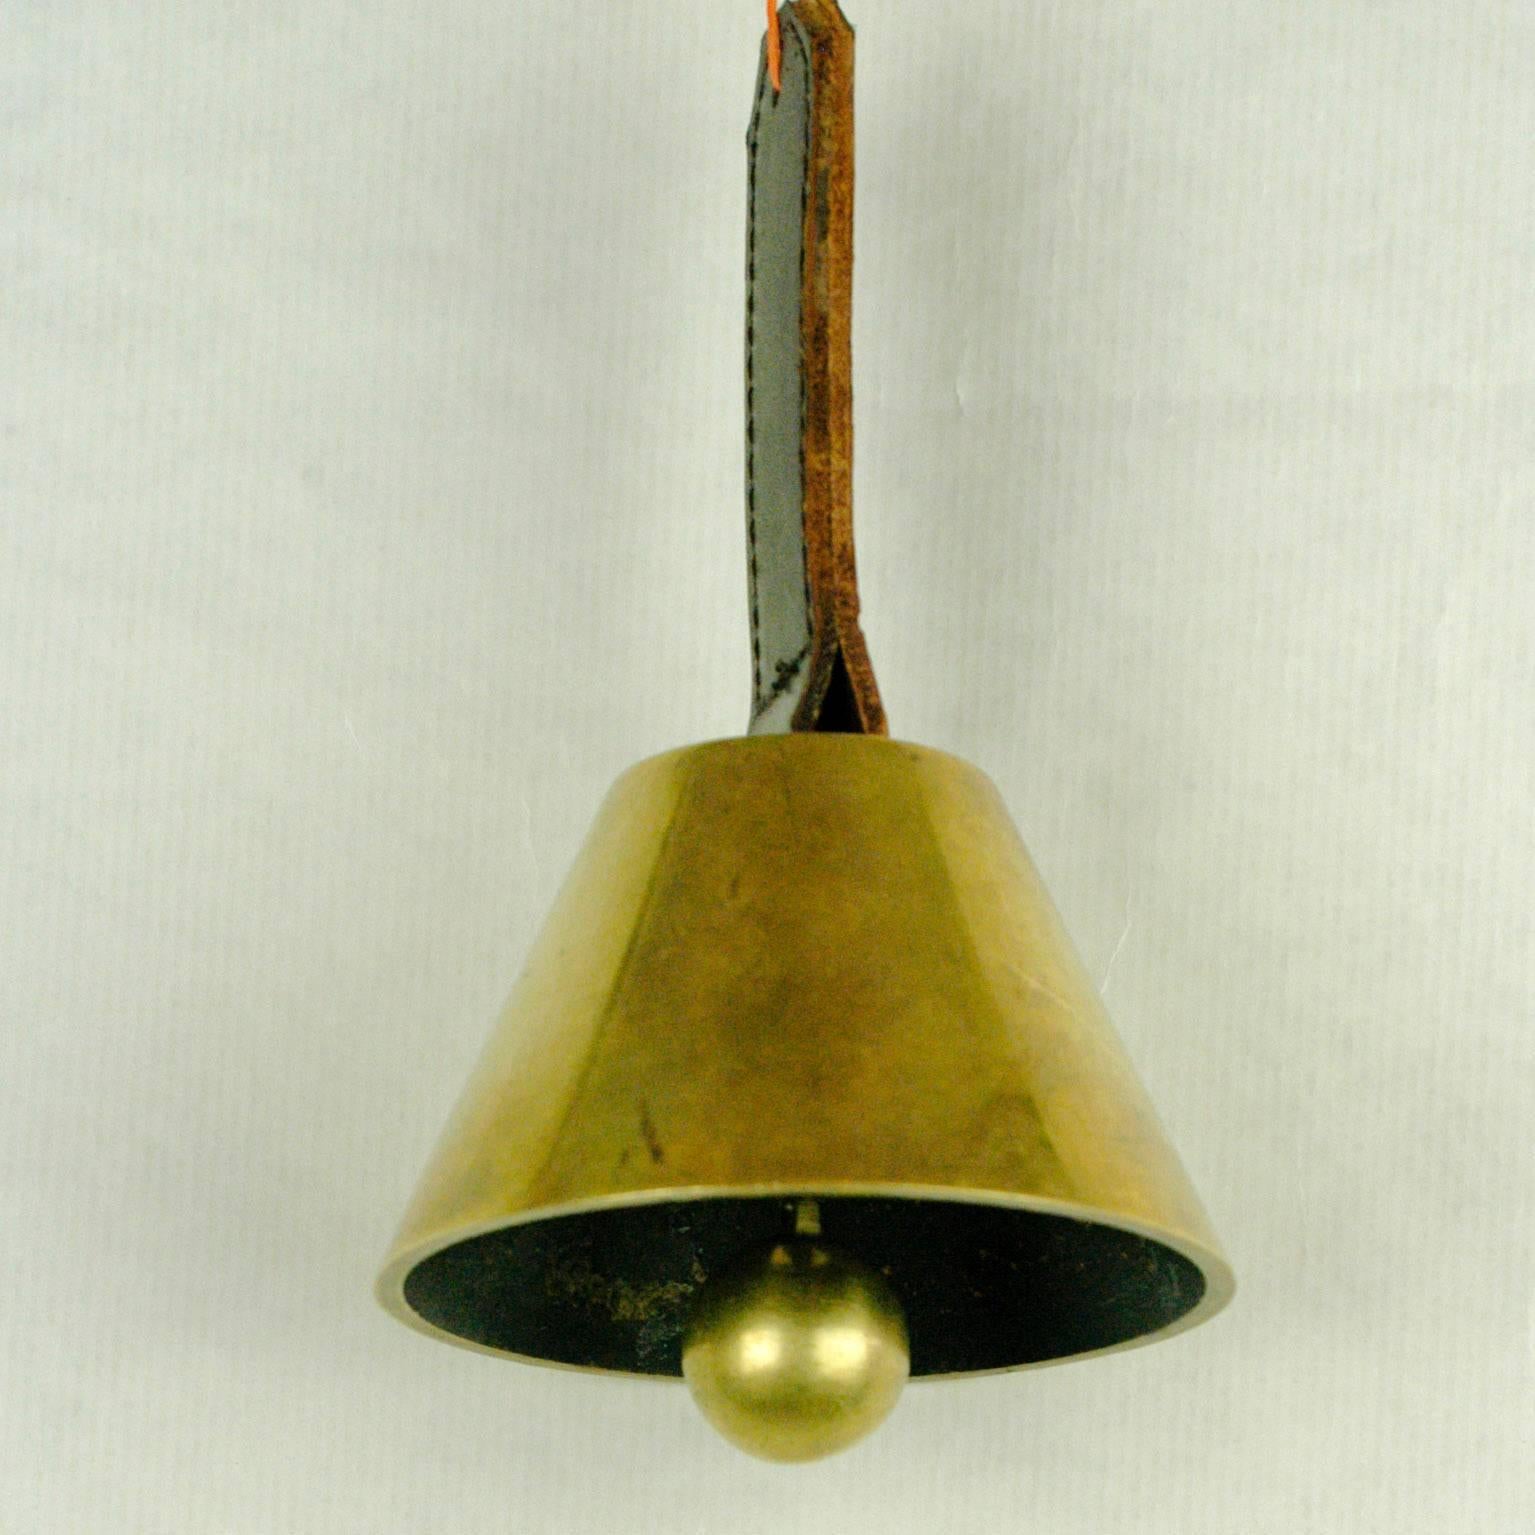 Austrian Midcentury Brass and Leather Table Bell by Carl Auböck For Sale 1